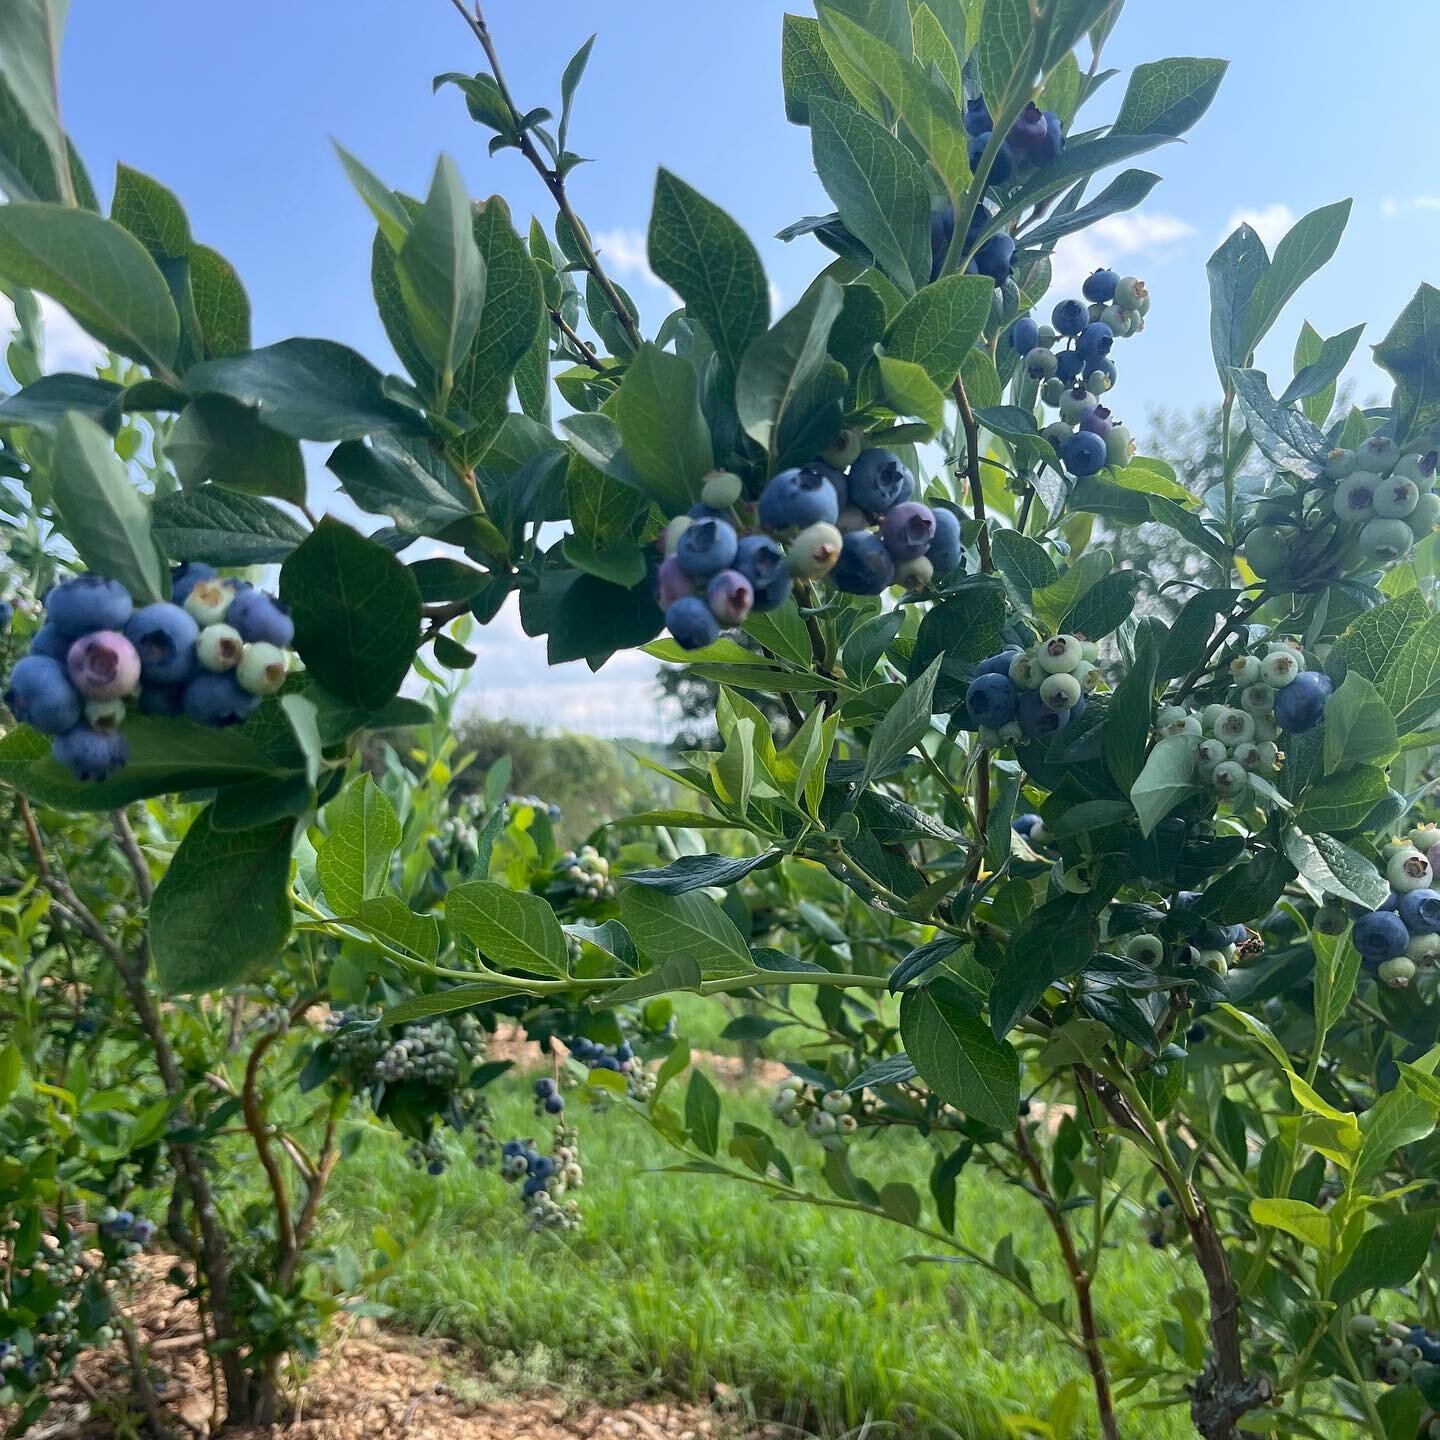 We are kicking off blueberries U-Pick season today. Bring your own containers or use our buckets. Open daily on weekdays and weekends 9am-5pm. $3.5/lbs. Proudly certified organic by @nofanewyork.